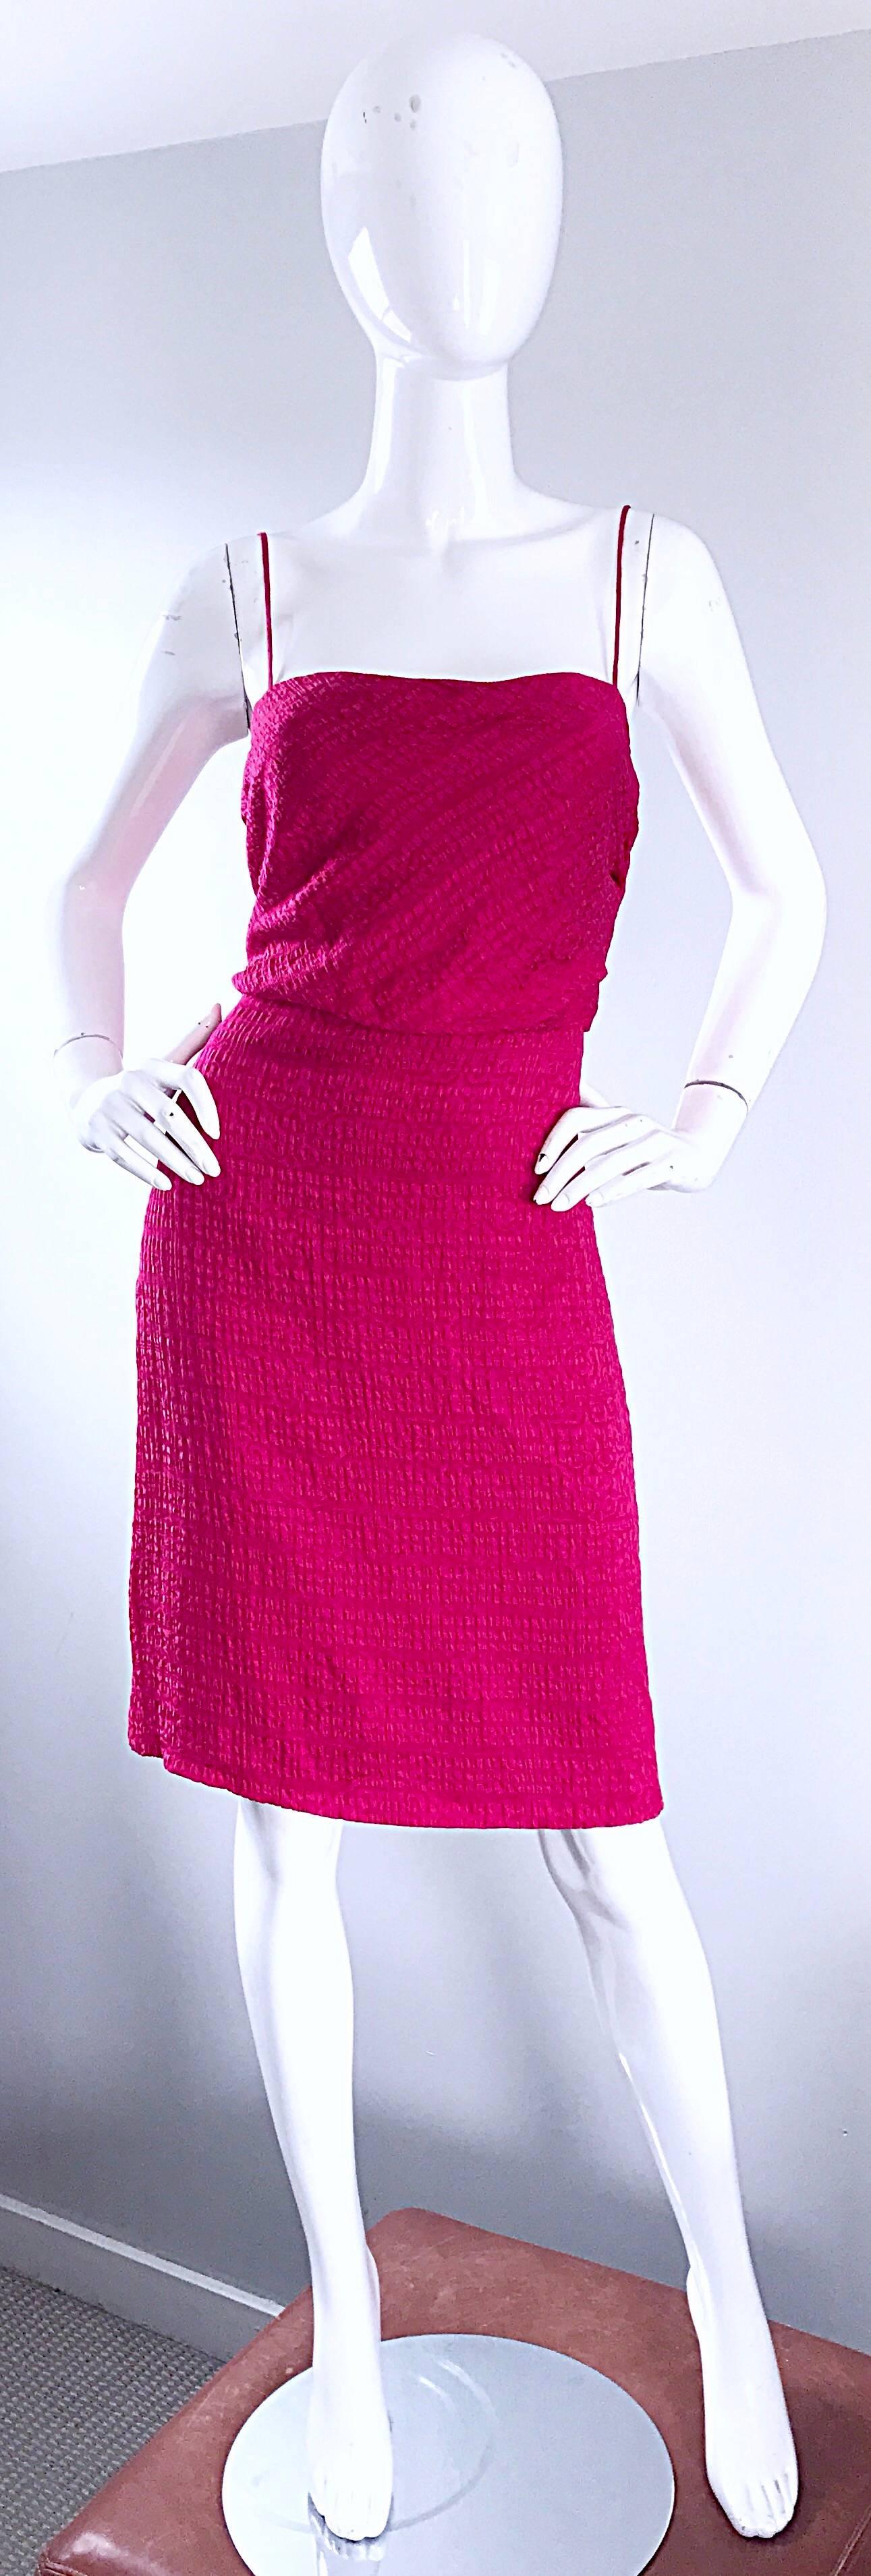 Beautiful 1990s GIROGIO ARMANI shocking hot raspberry  pink / fuchsia textured silk dress! Luxurious textured silk. Spagetti straps and hidden side zipper with hook-and-eye closure. Interior strap offers additional support. Extremely well made, and